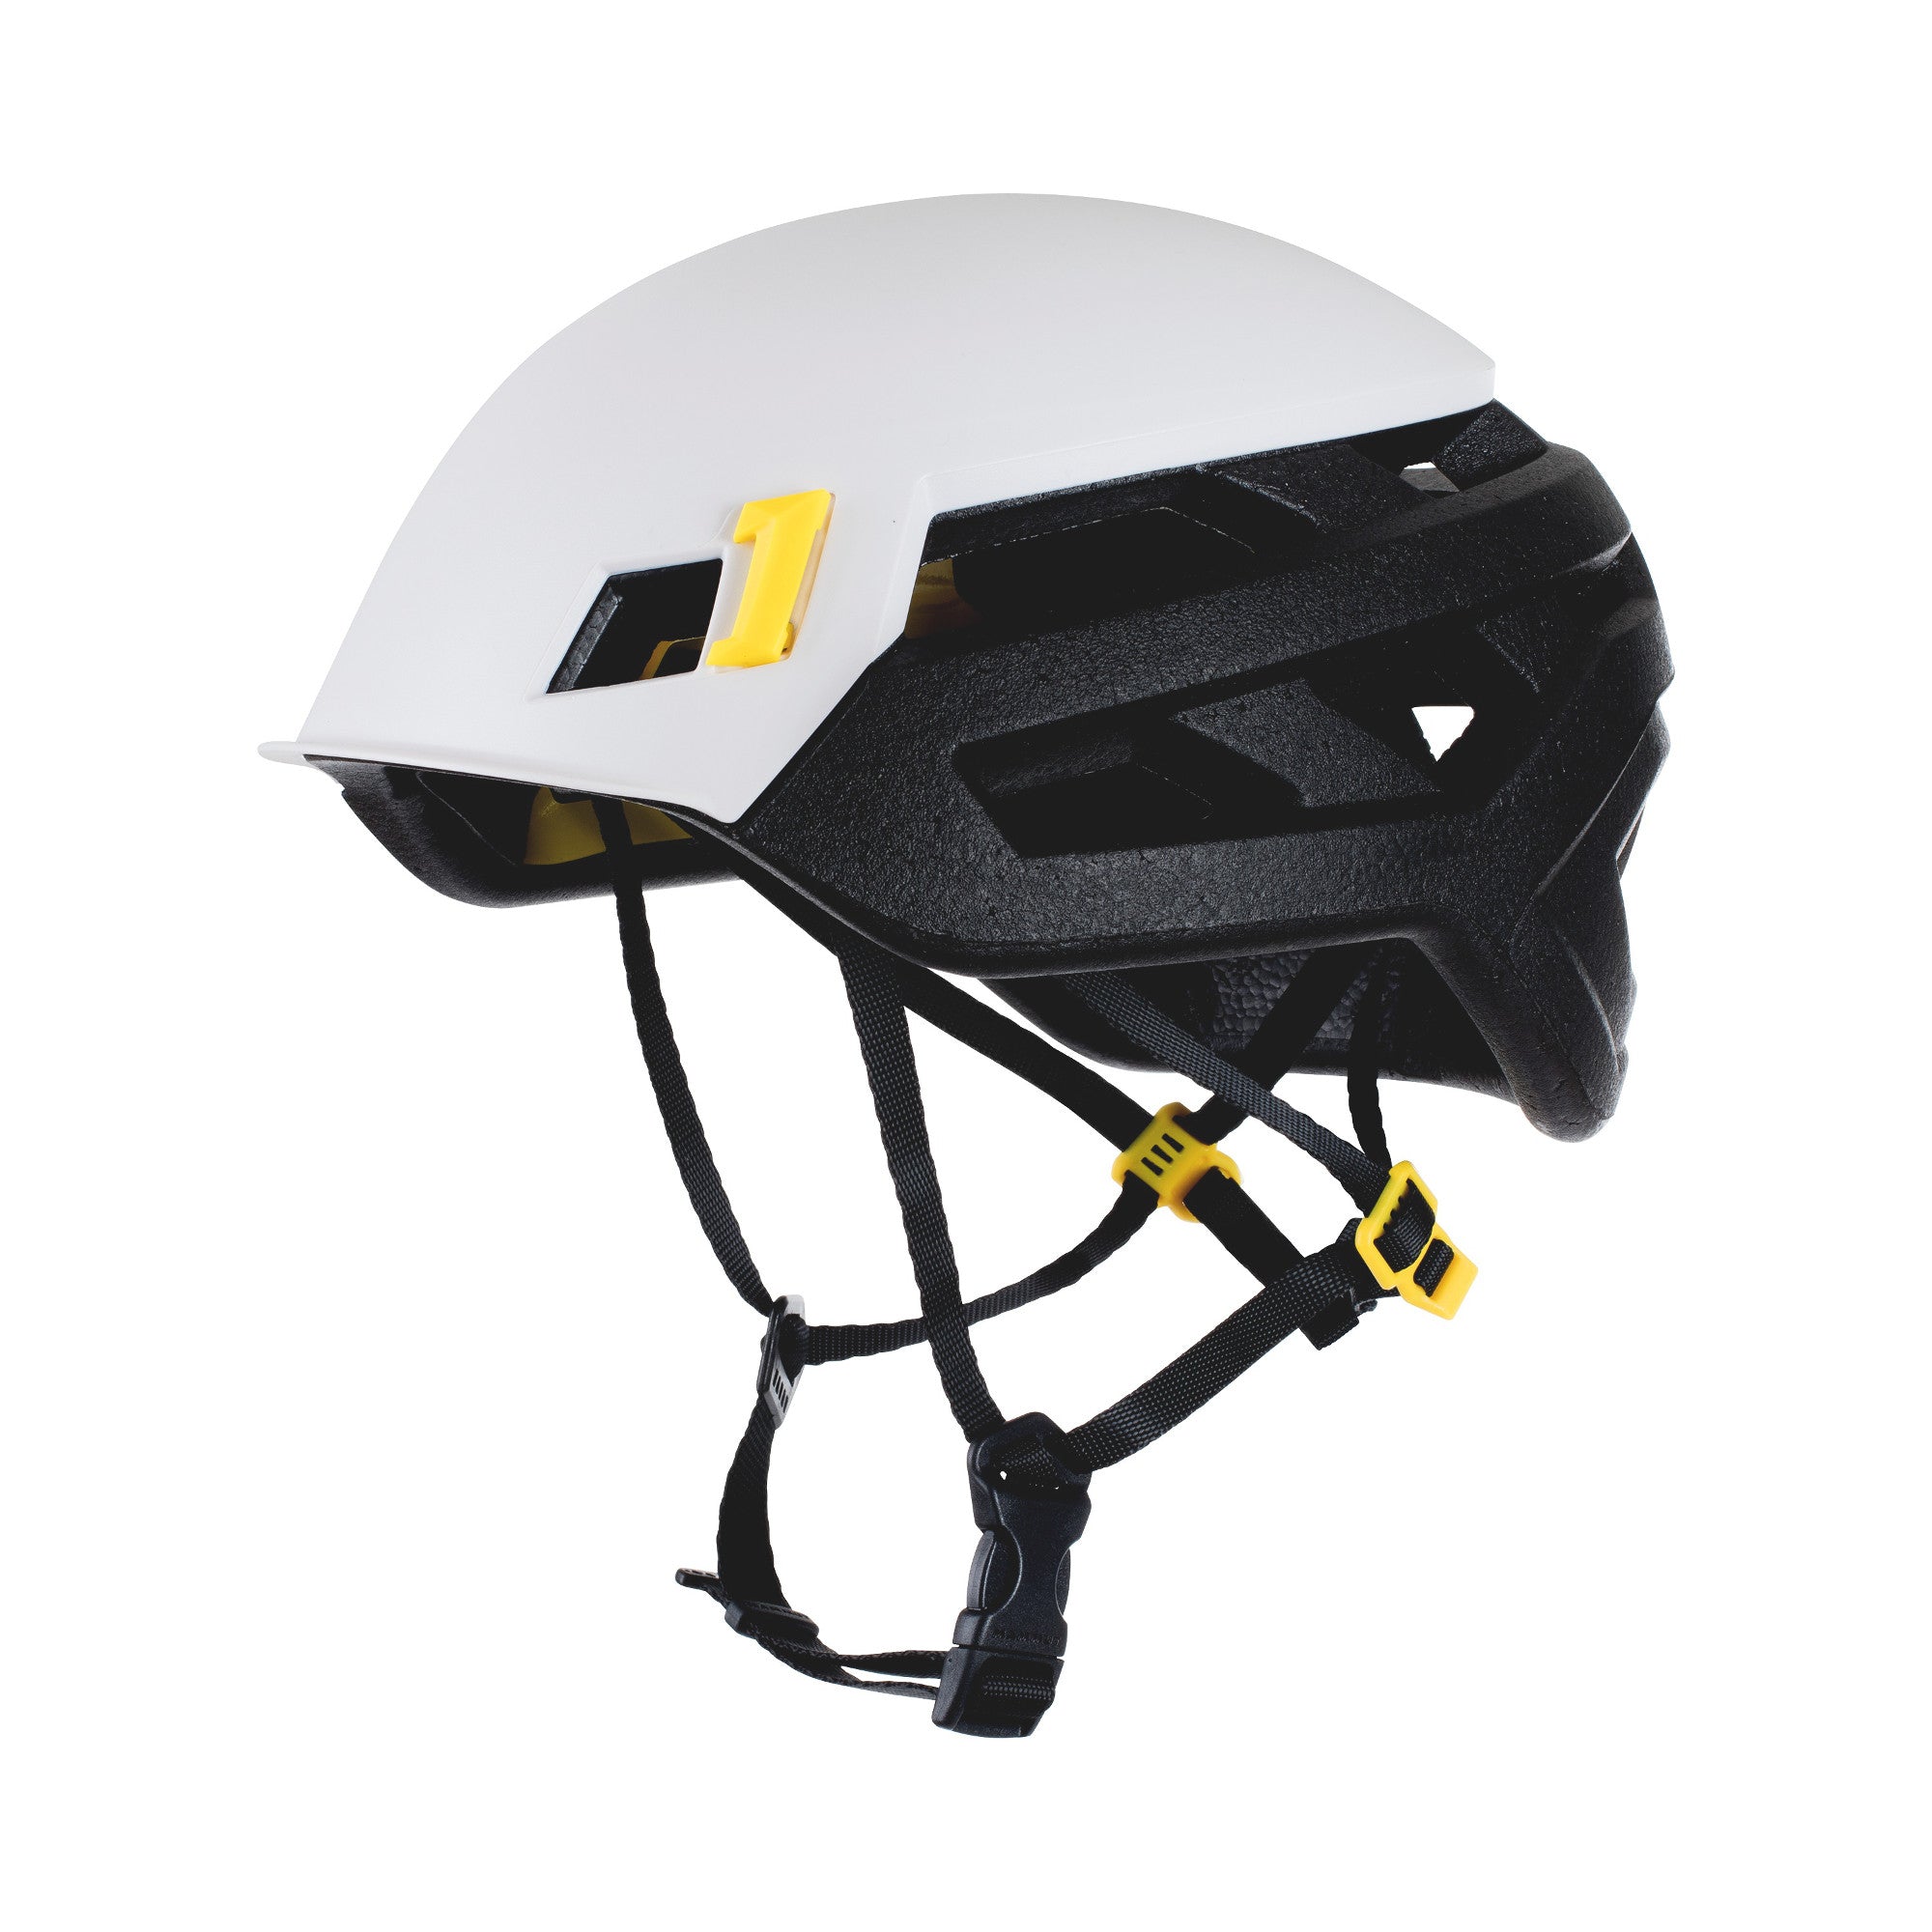 Mammut Wall Rider MIPS climbing helmet, in white and black colours